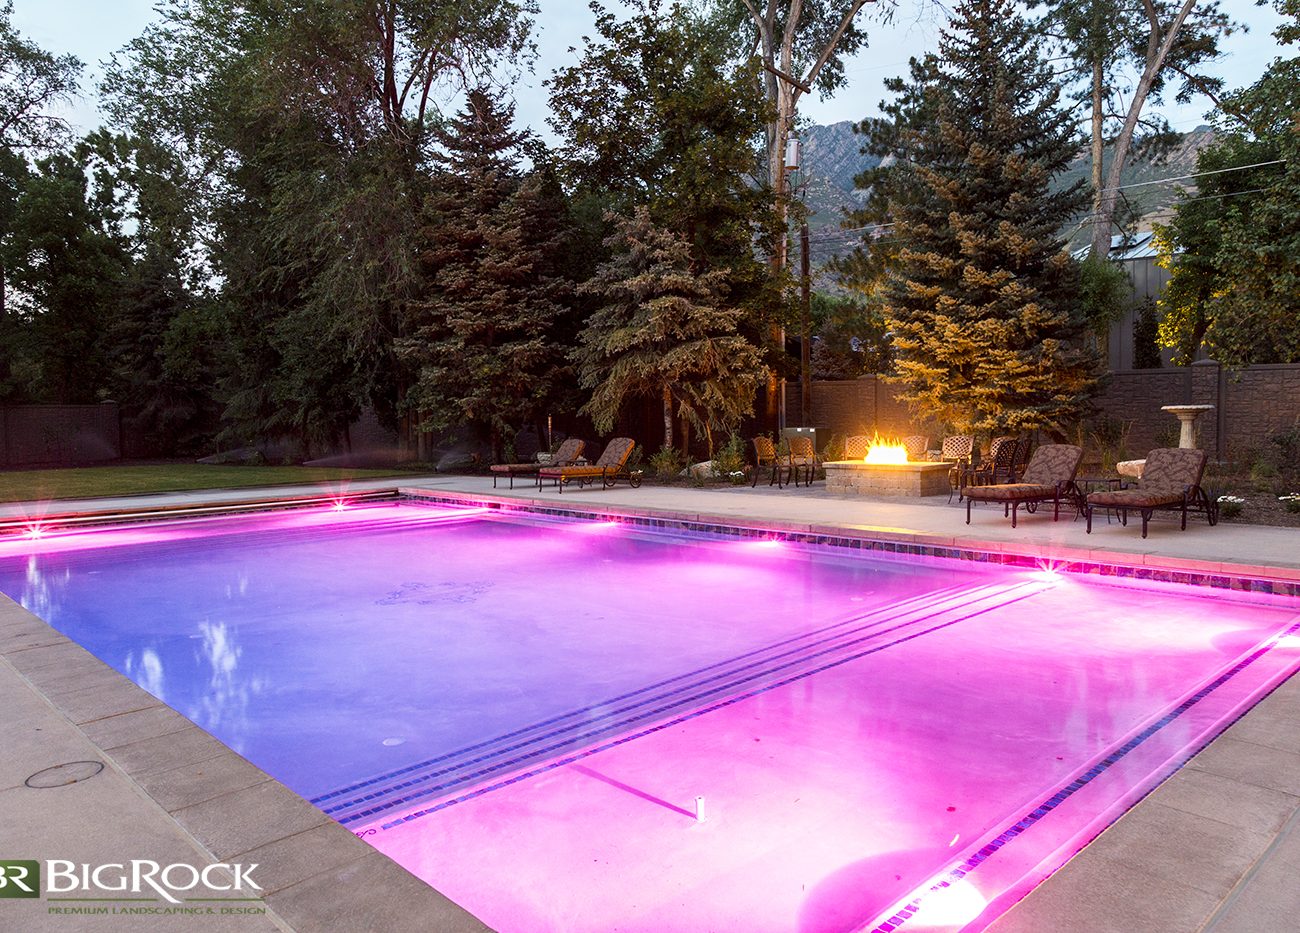 Don't let backyard pool lighting be boring. Big Rock Landscaping can make your pool the hit of the neighborhood with colorful pool light installation.